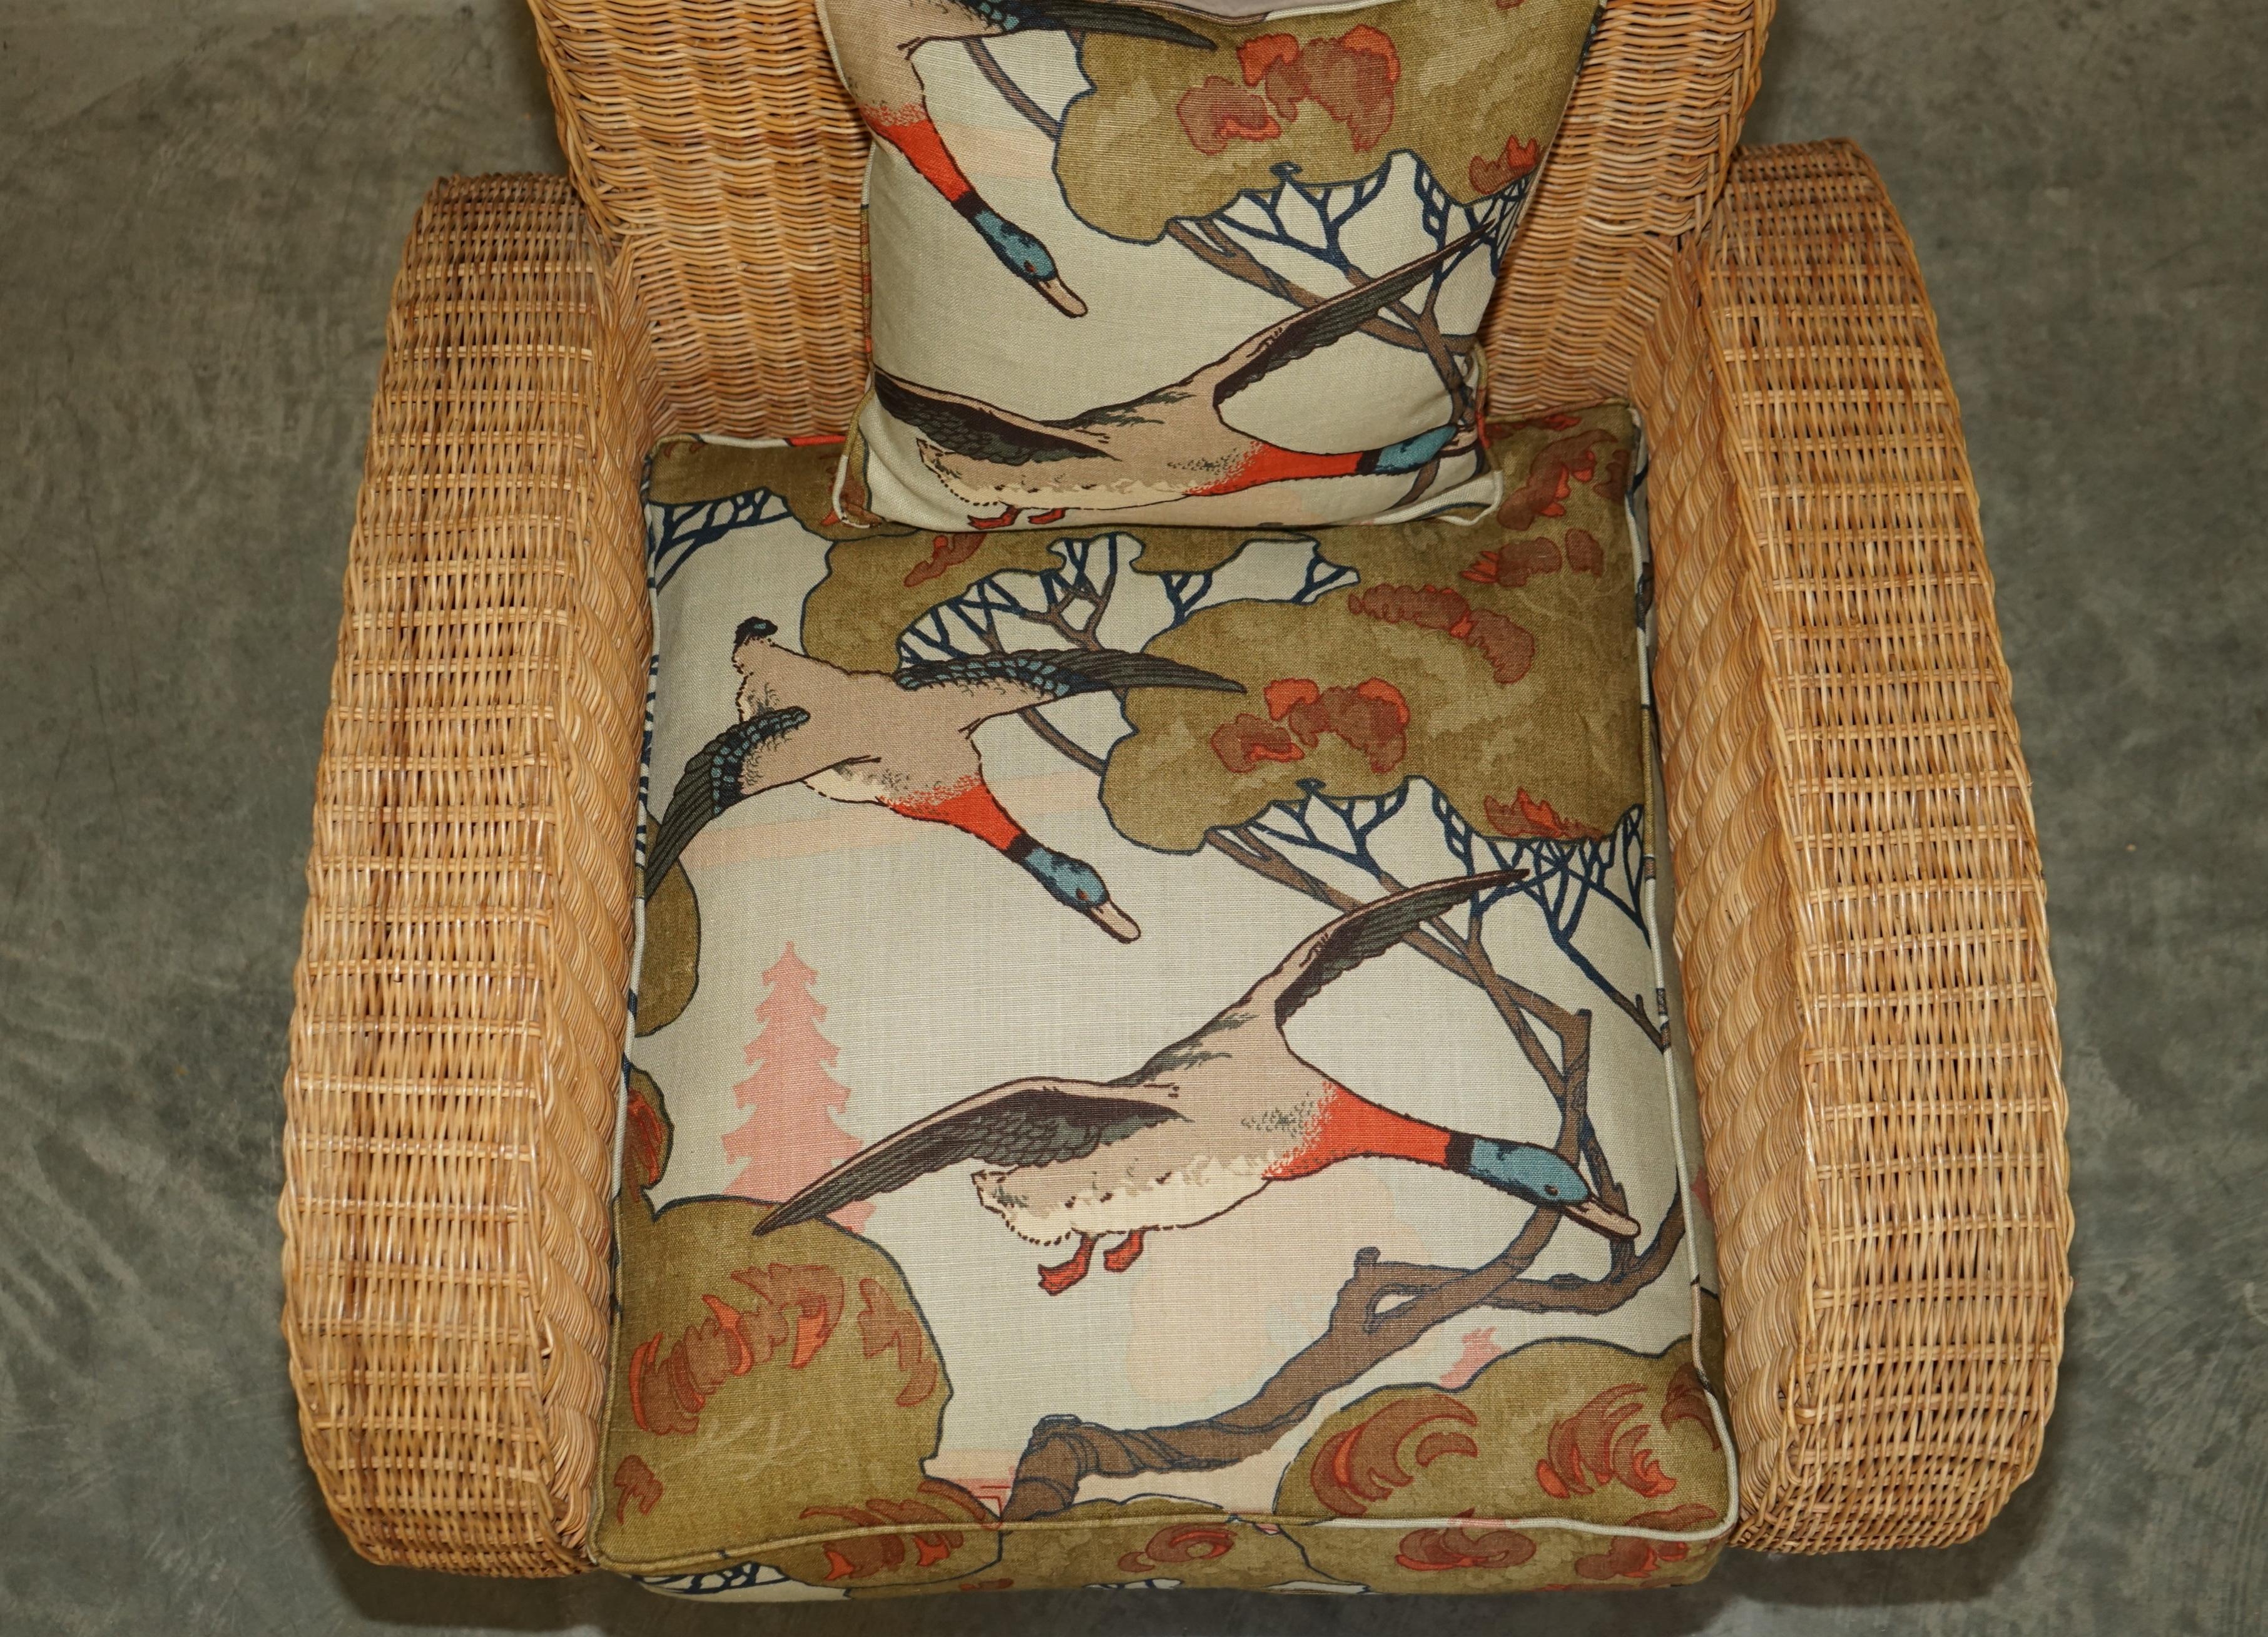 PAIR OF ART DECO STYLE WICKER CLUB ARMCHAIRS WiTH MULBERRY FLYING DUCKS CUSHIONS For Sale 8